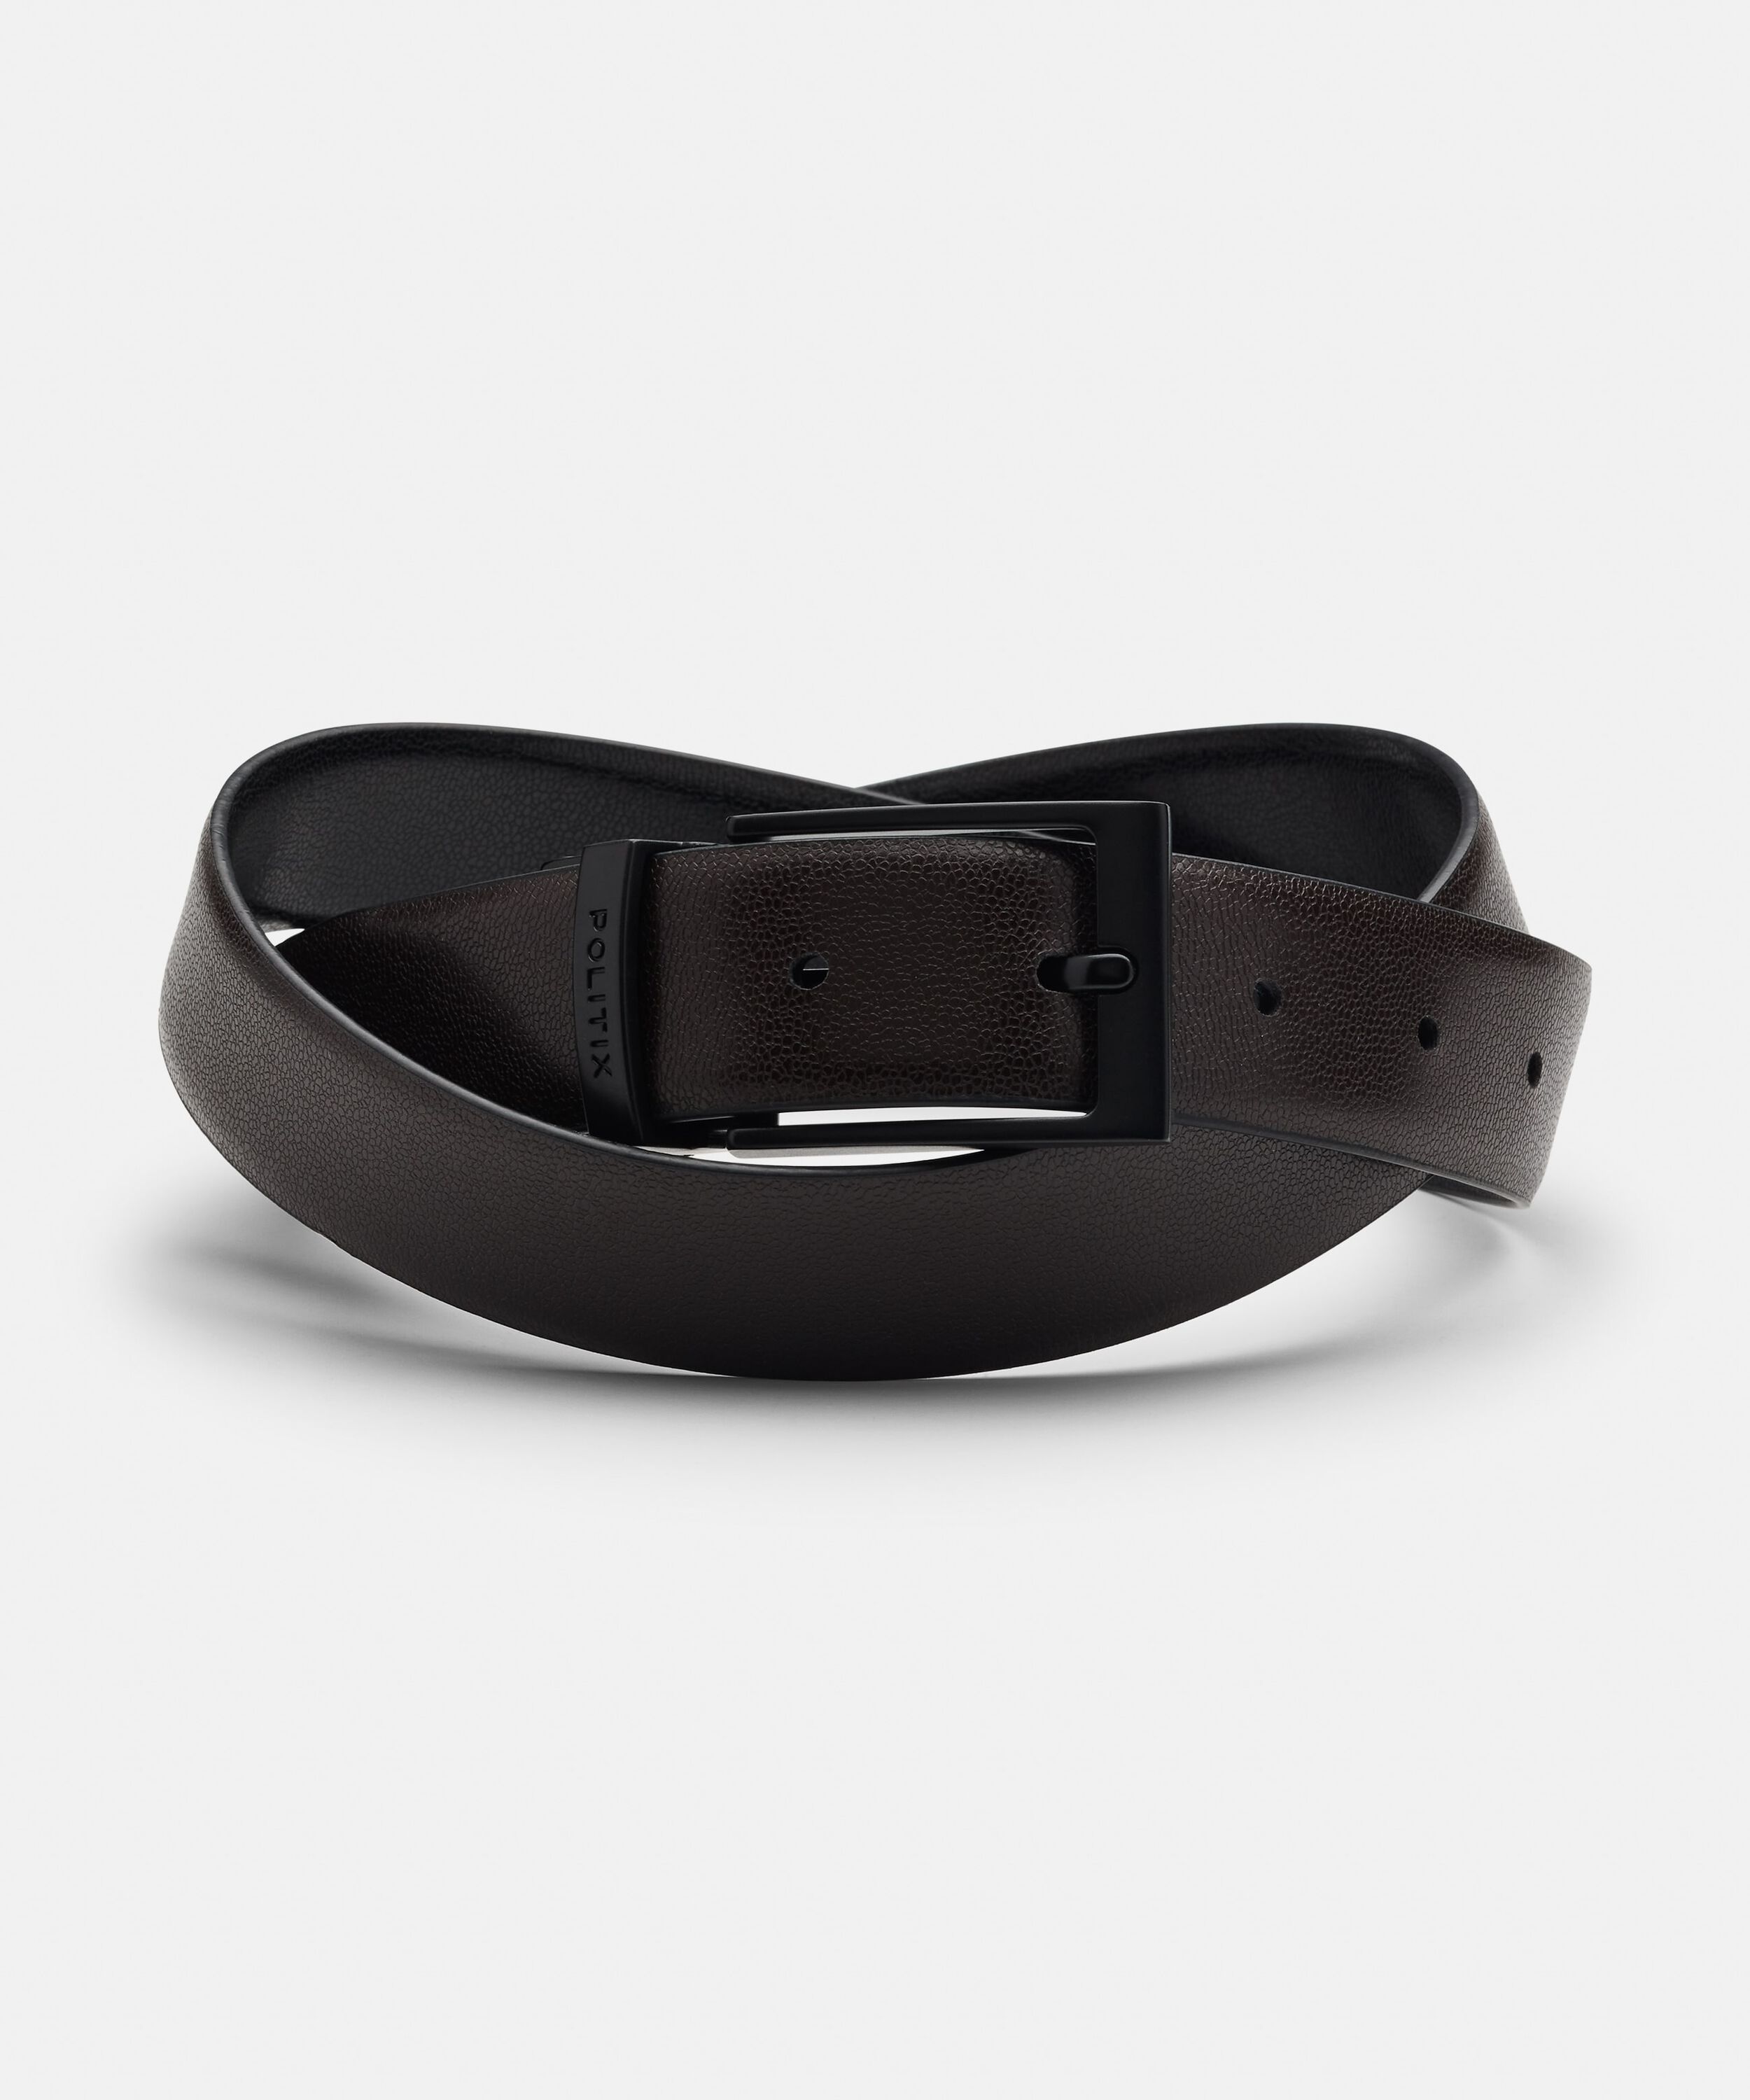 Pebble Grain Leather Dress Belt With Pin Buckle - Black/Brown